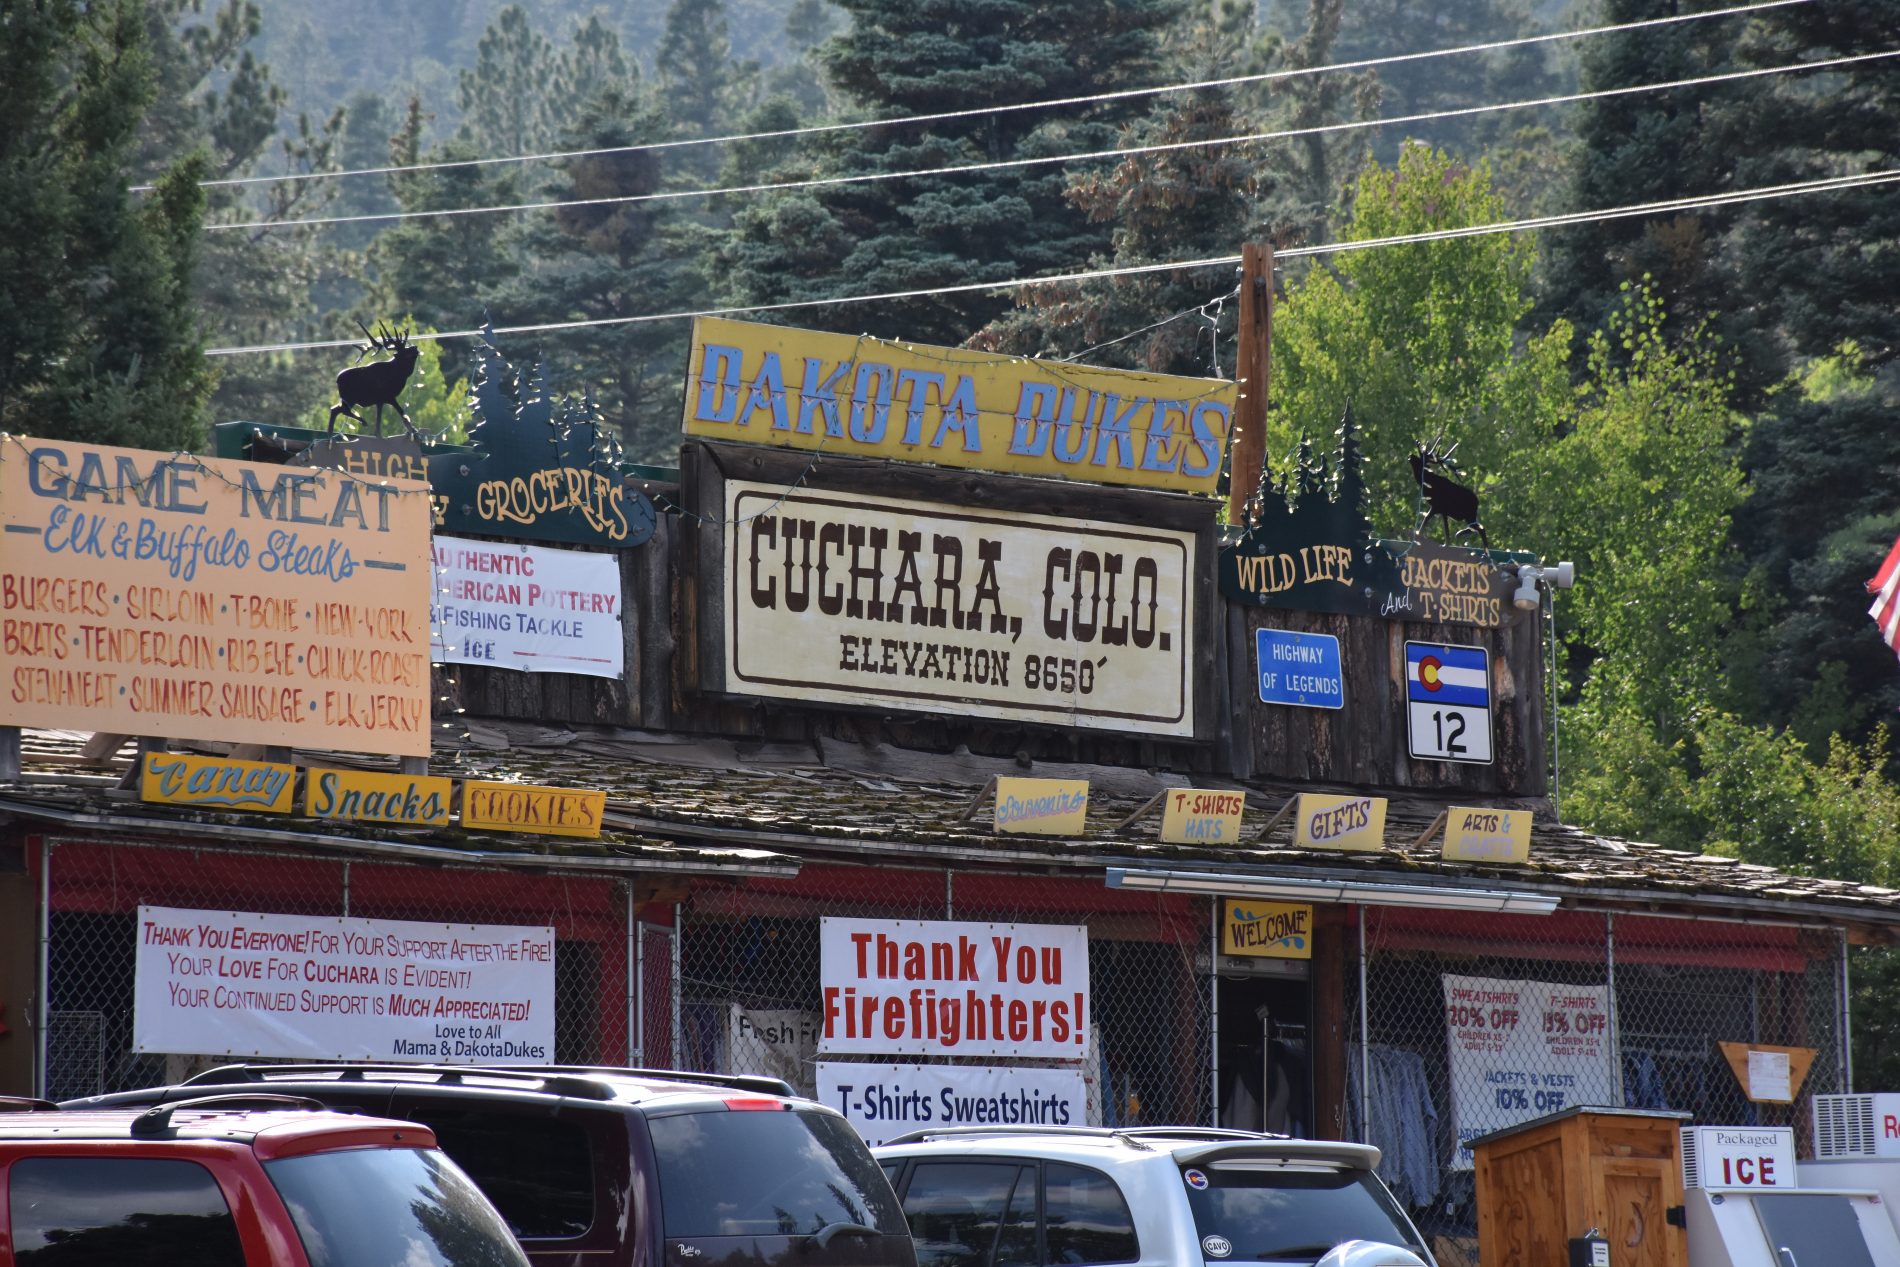 A log built building, racks of shirts show, a white banner with red printing reads thank you firefighters!. Yellow sign with blue lettering reads Dakota Dukes. Brown writing below reads Cuchara, Colorado. Elevation 8650.